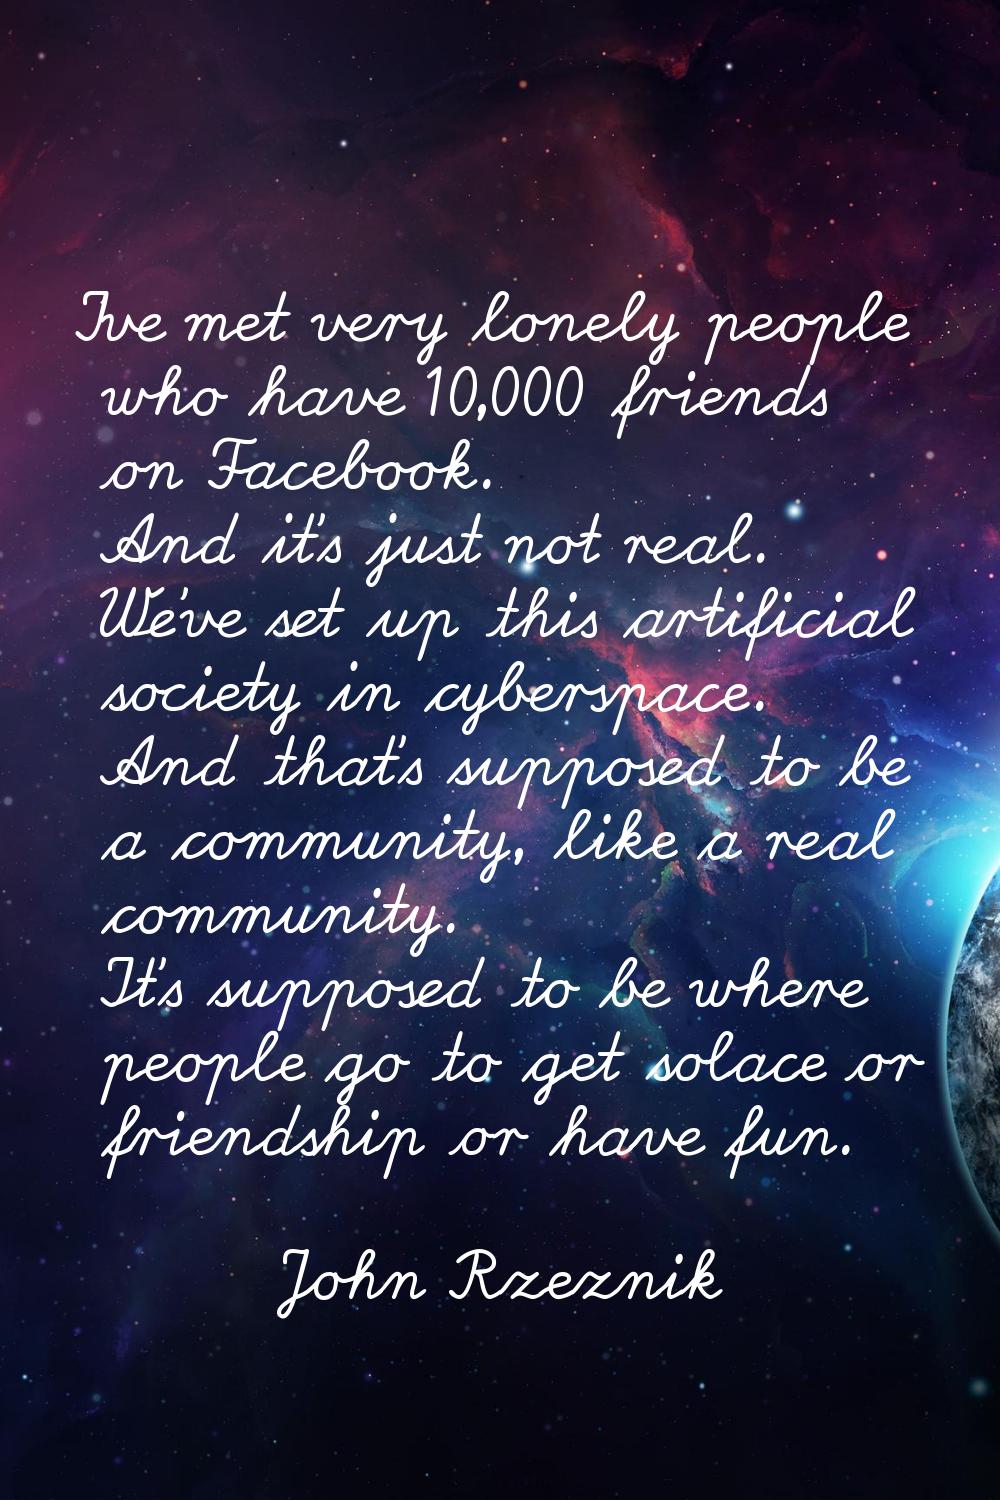 I've met very lonely people who have 10,000 friends on Facebook. And it's just not real. We've set 